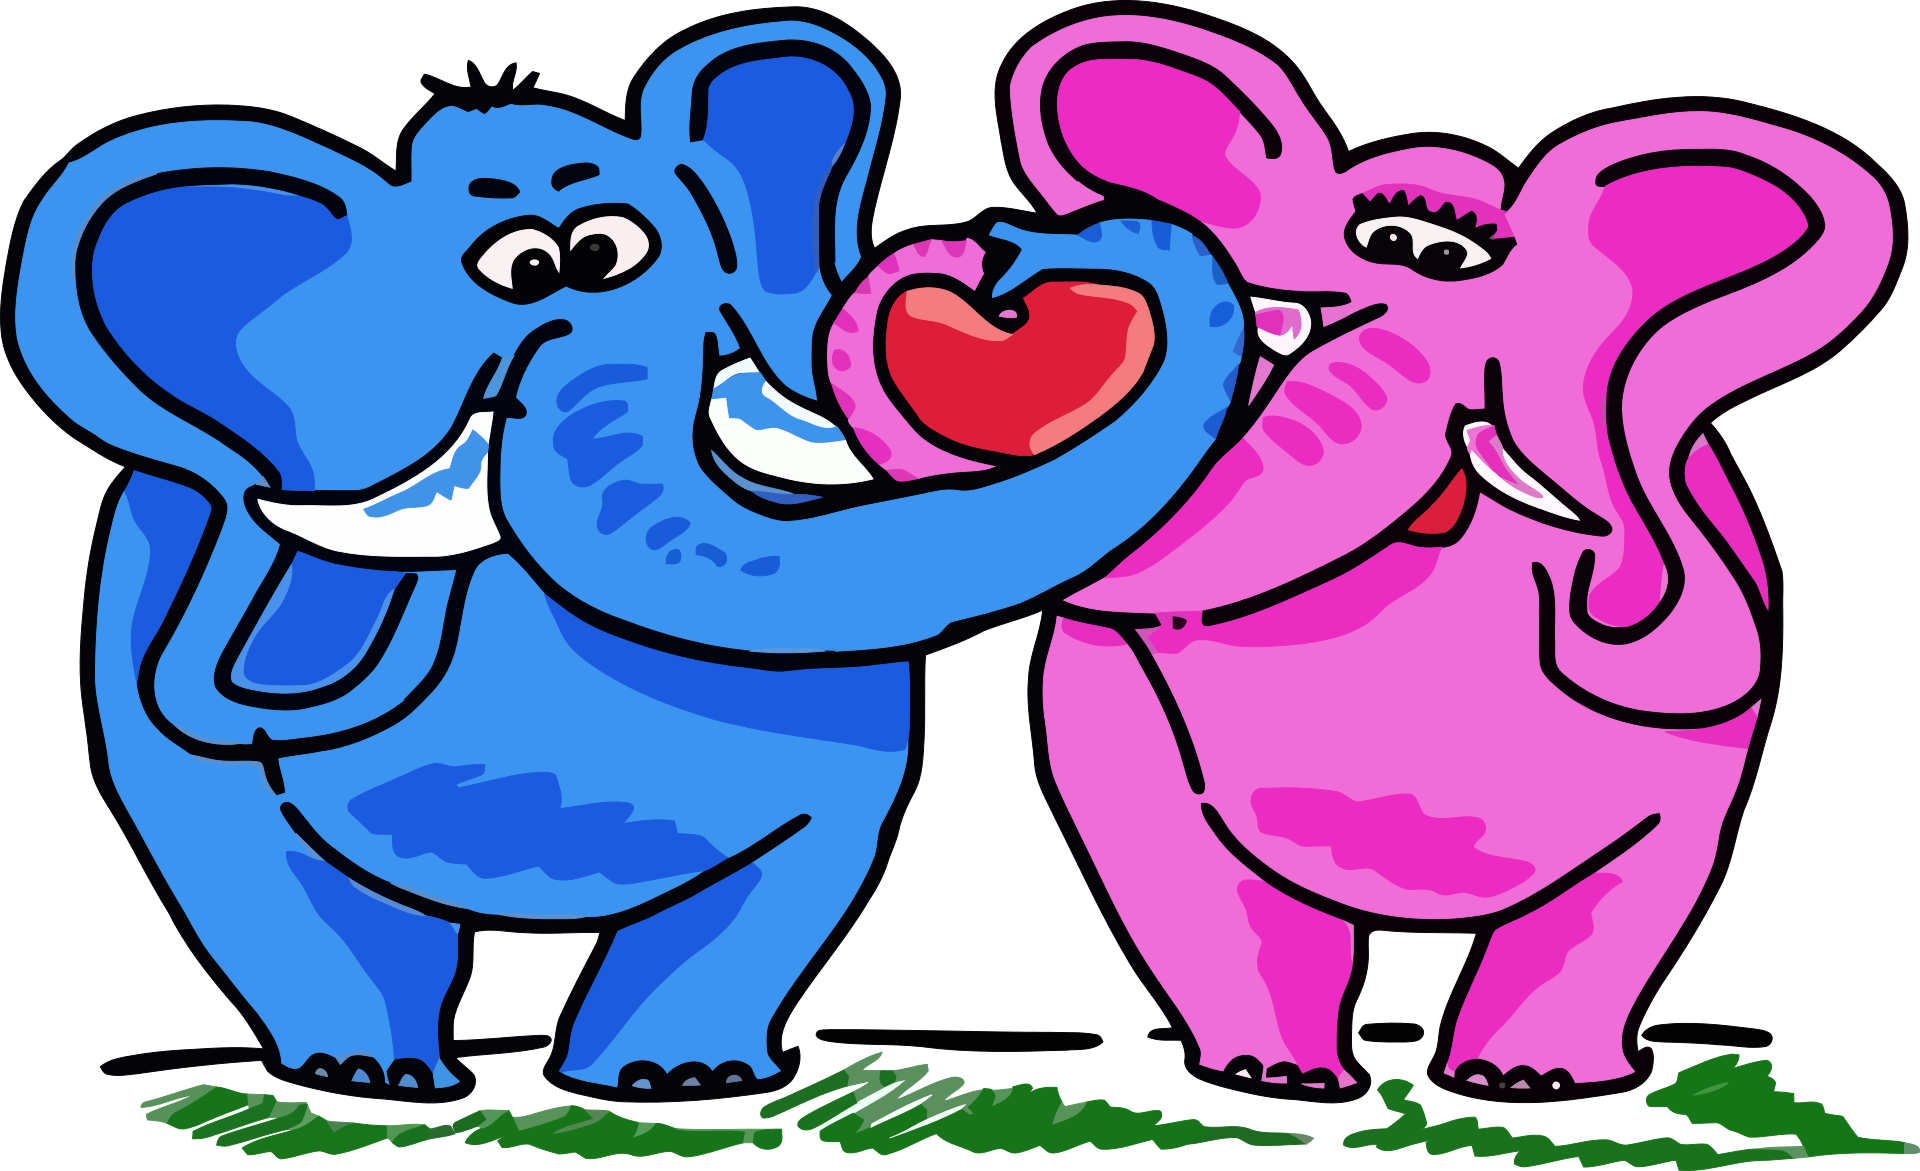 Drawing of two elephants in love free image.